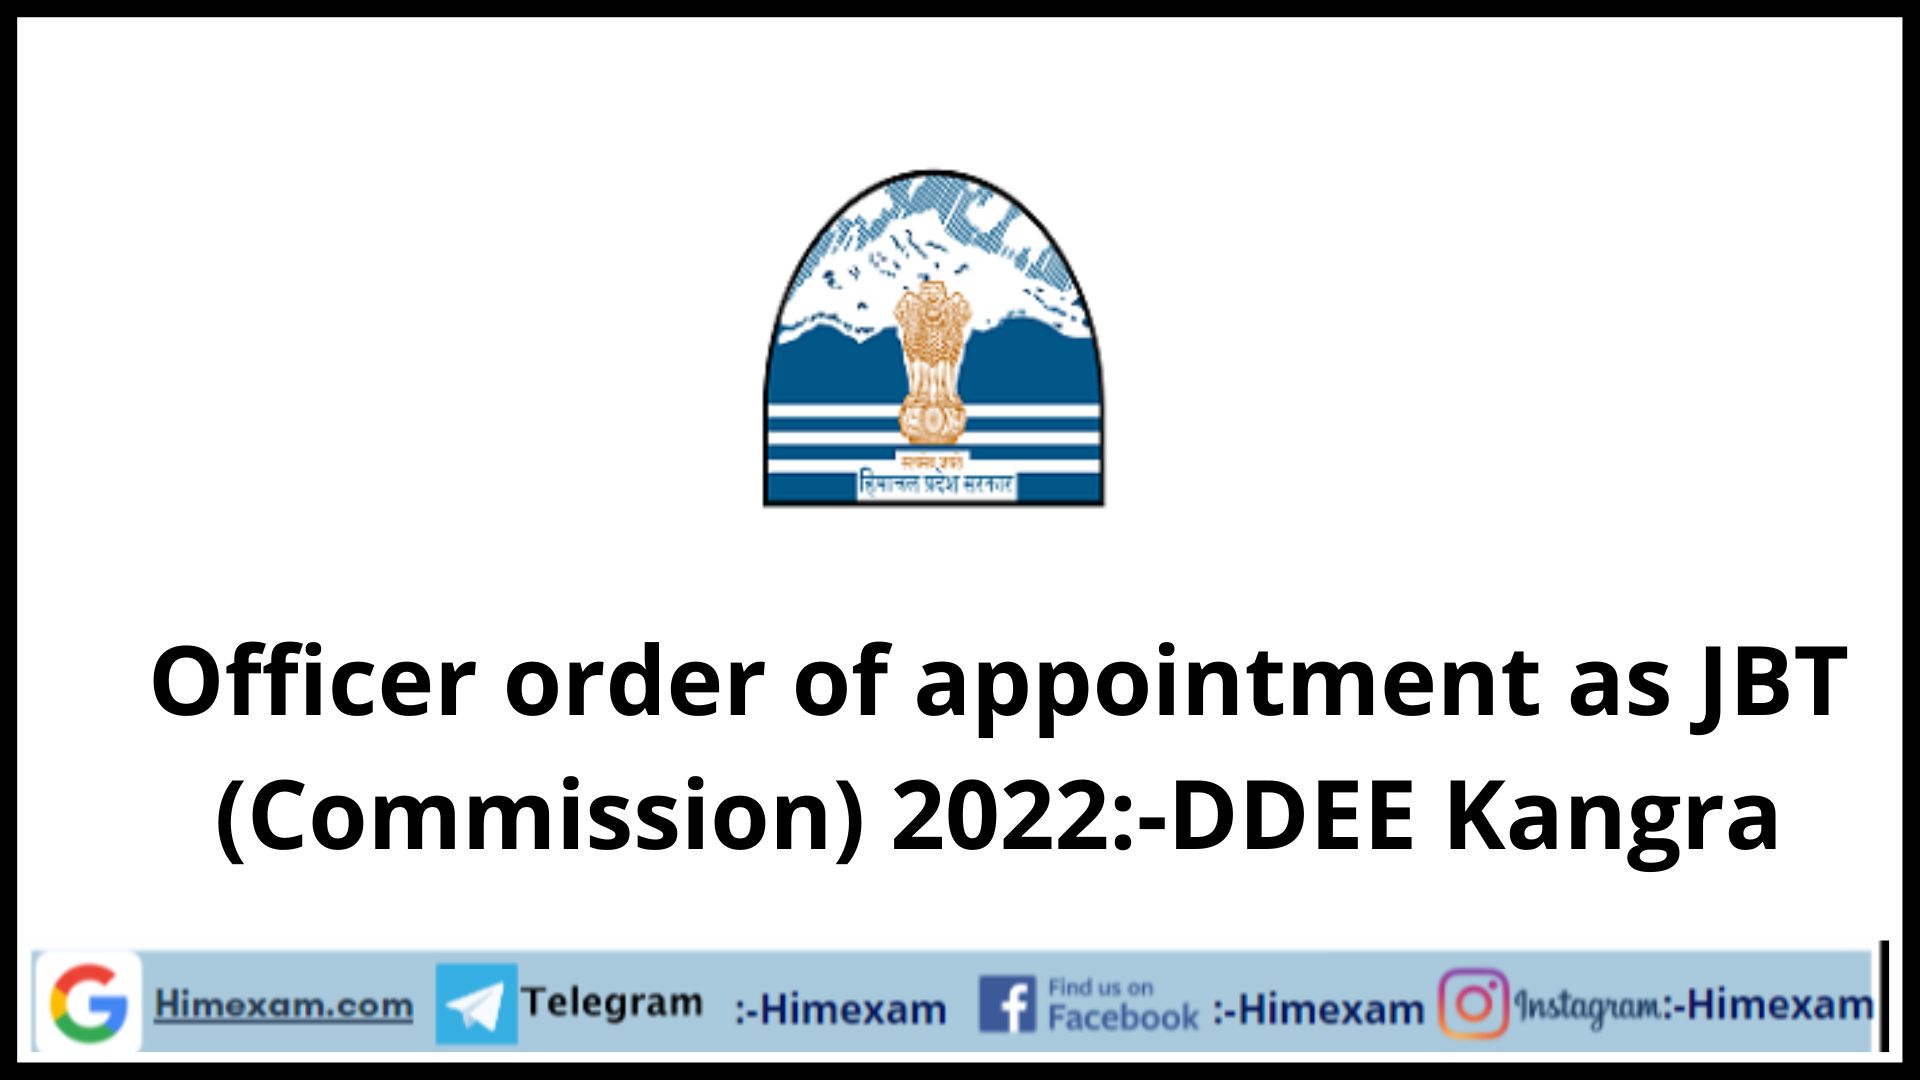 Officer order of appointment as JBT (Commission) 2022:-DDEE Kangra